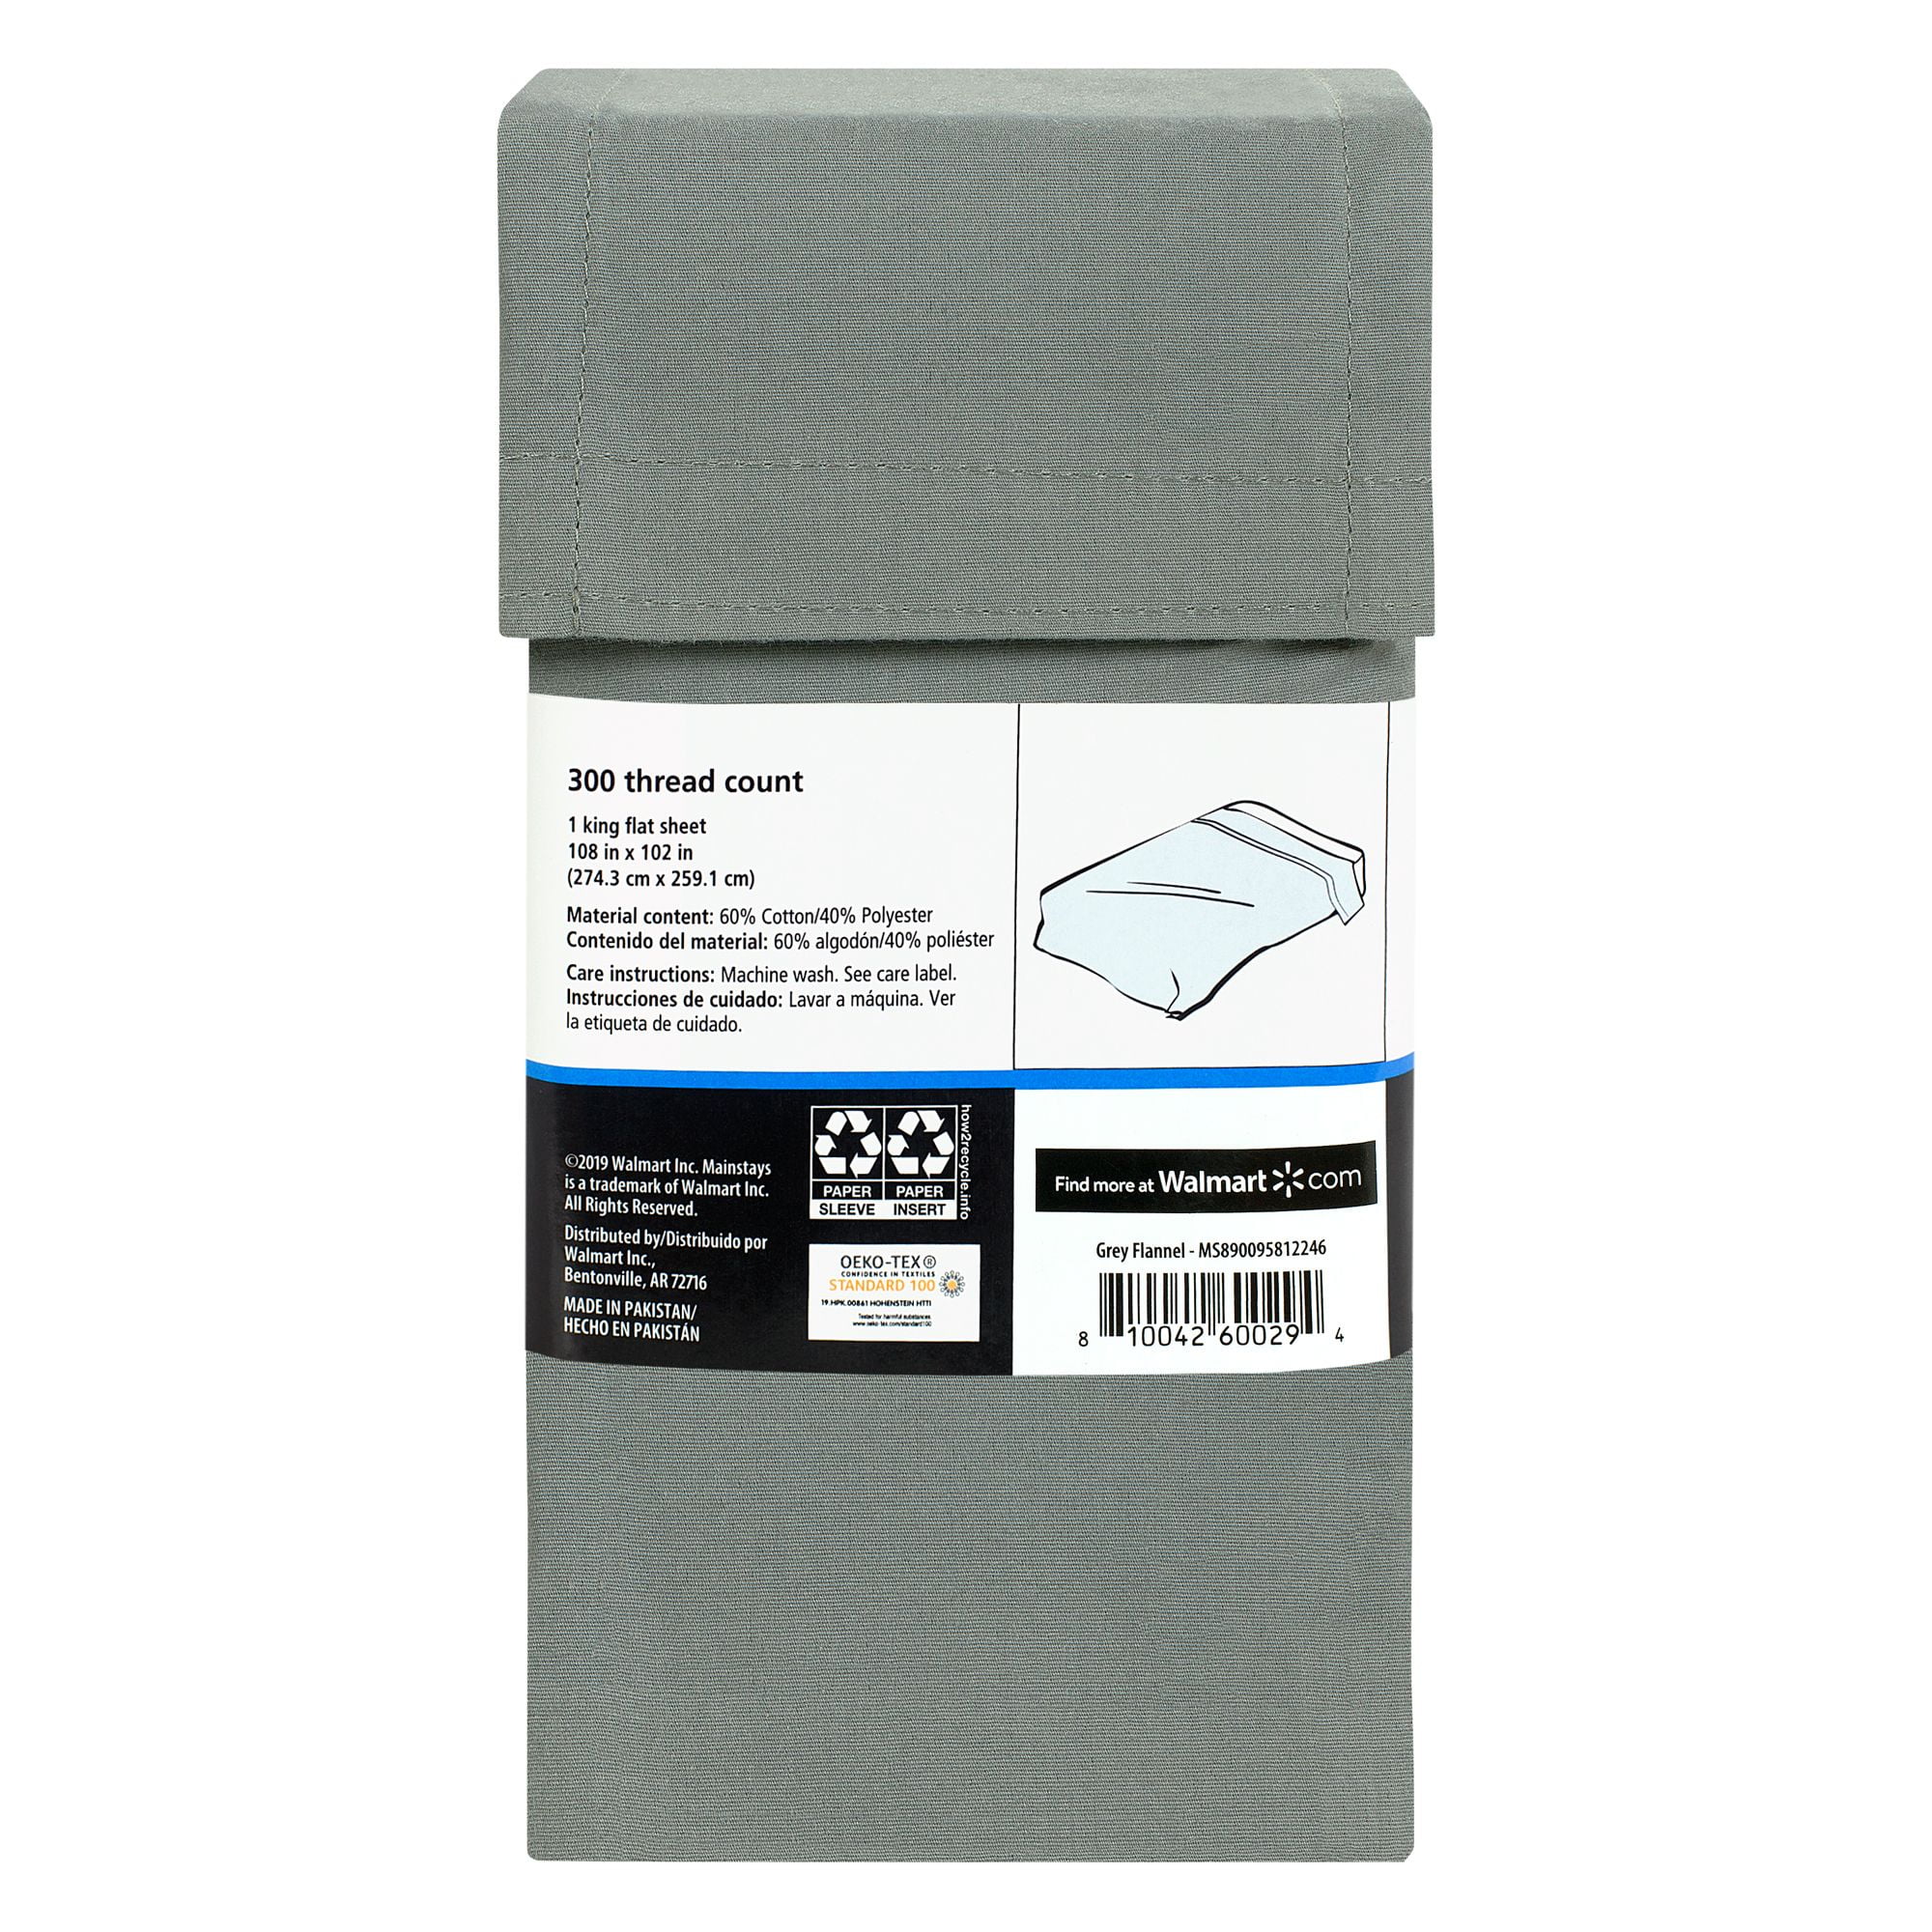 Angebot anführen Mainstays 300TC Sheet Rich Easy Flat Sheet,Grey Bed Cotton Percale Care King